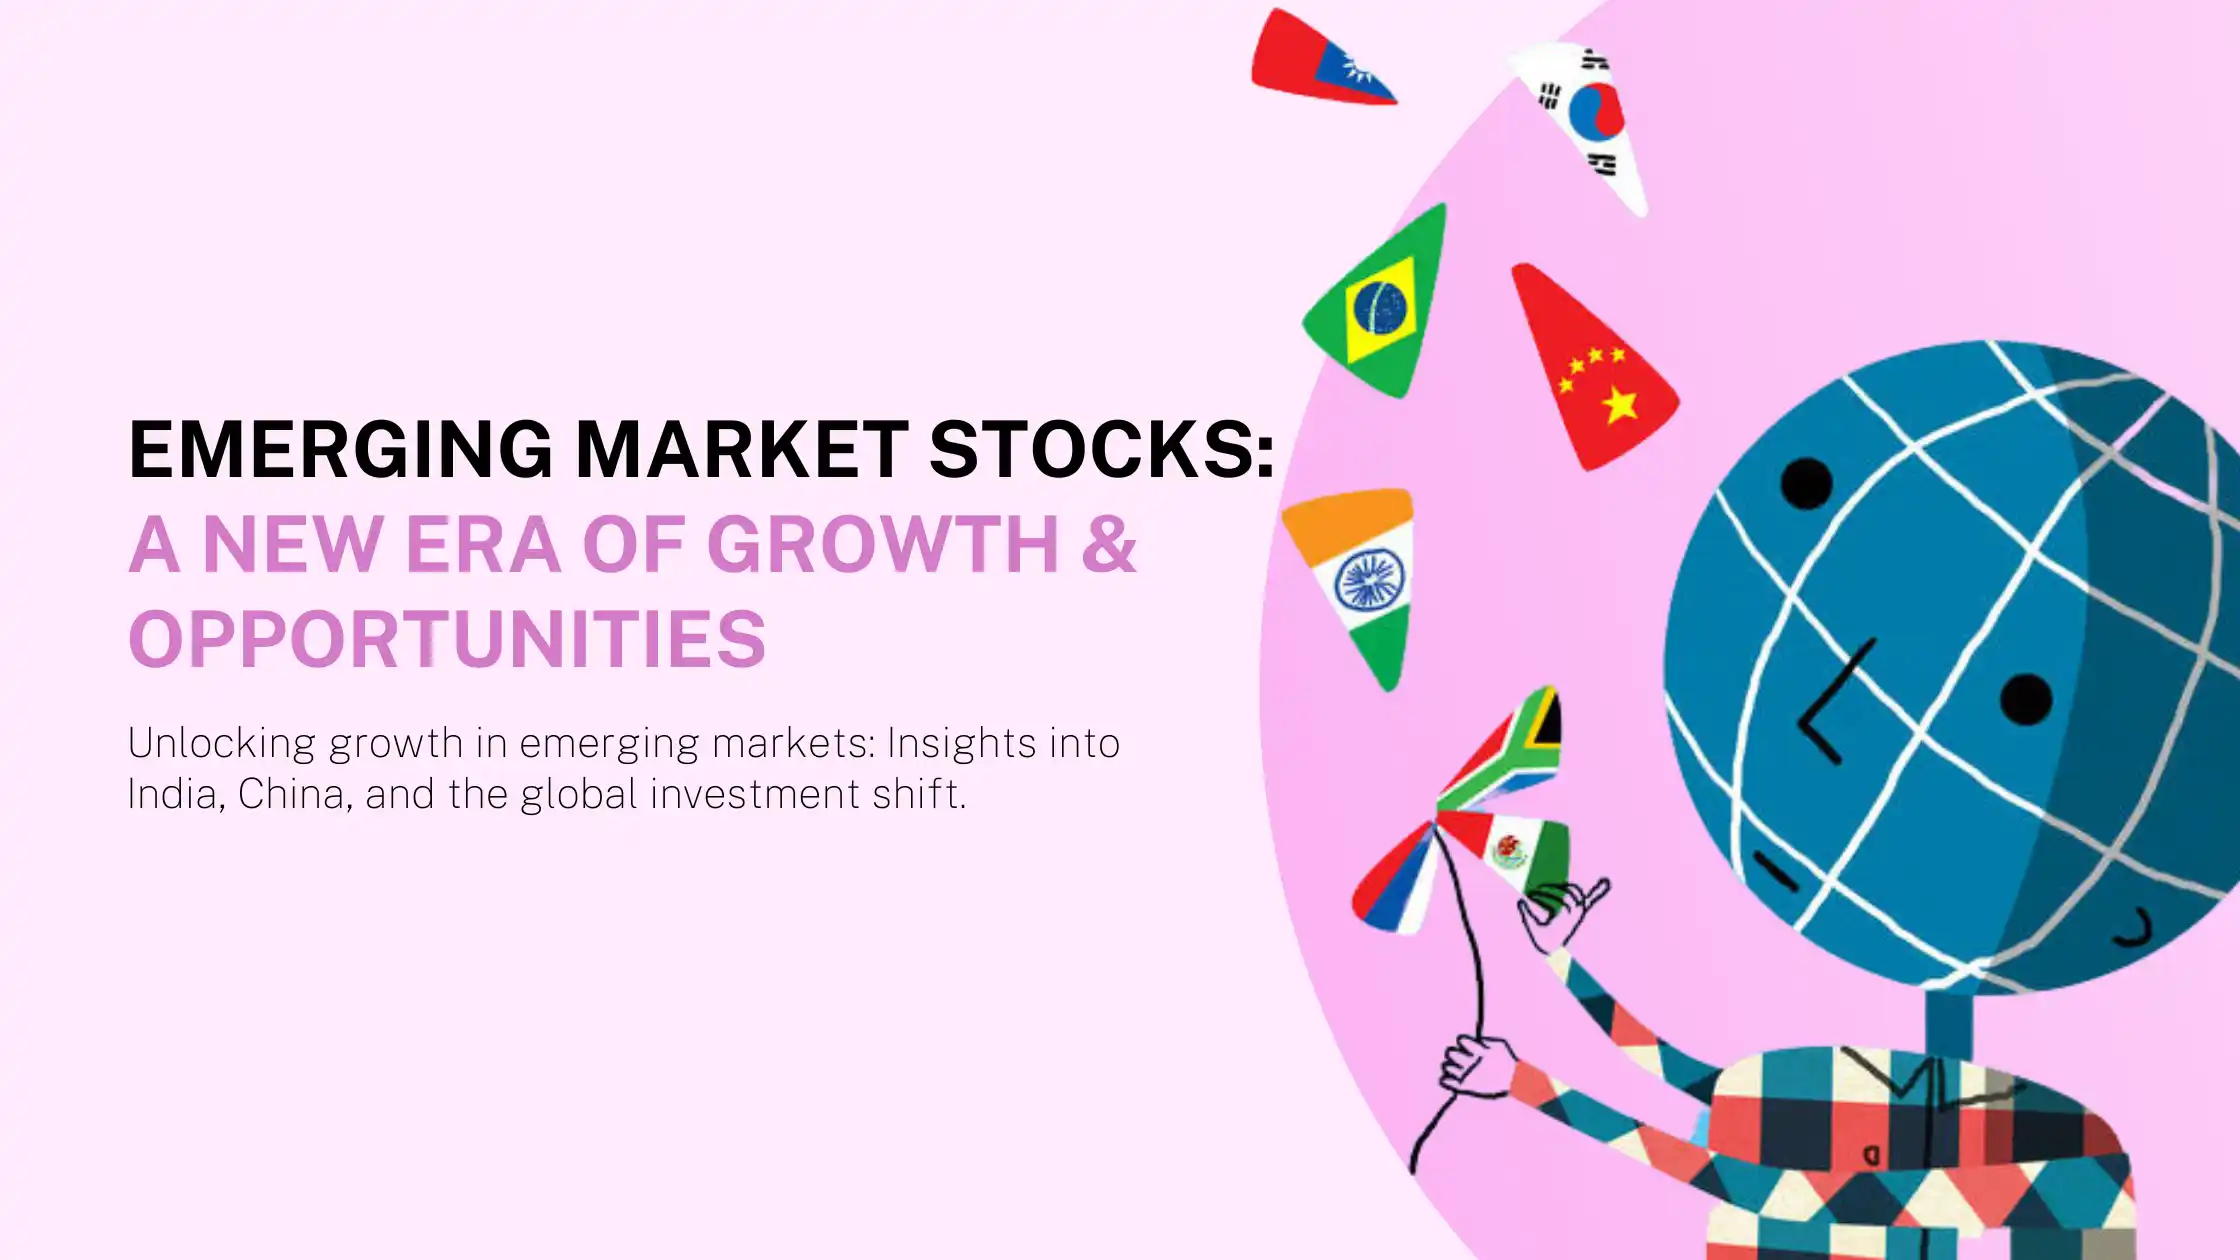 Emerging Market Stocks: A New Era of Growth & Opportunities